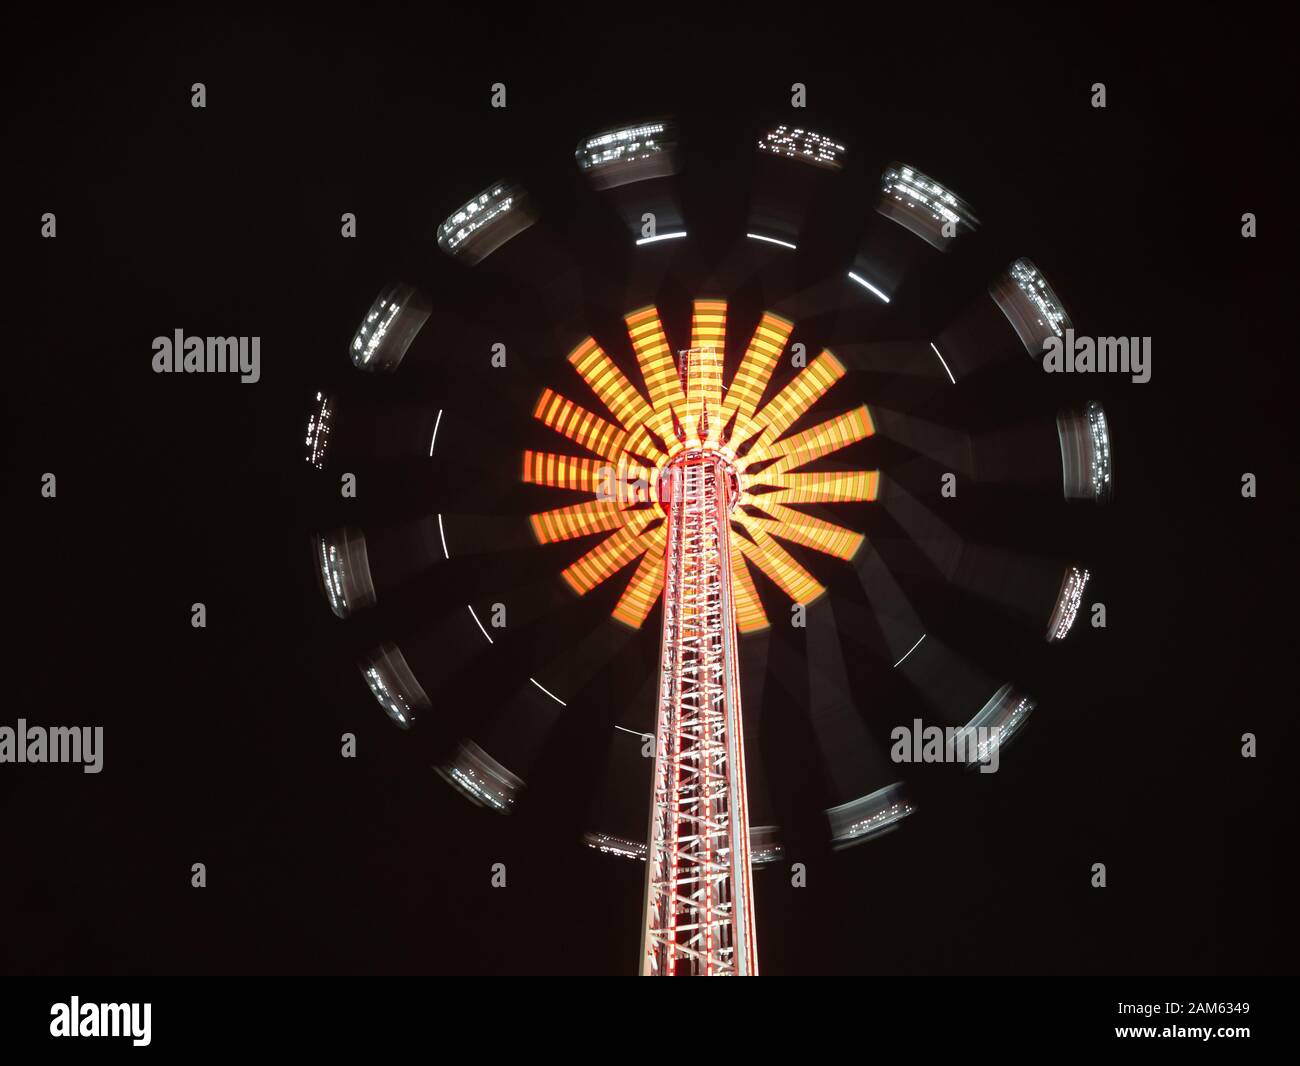 Circles of lights created by moving spinning wheel at night in amusement winter wonderland park in London Stock Photo